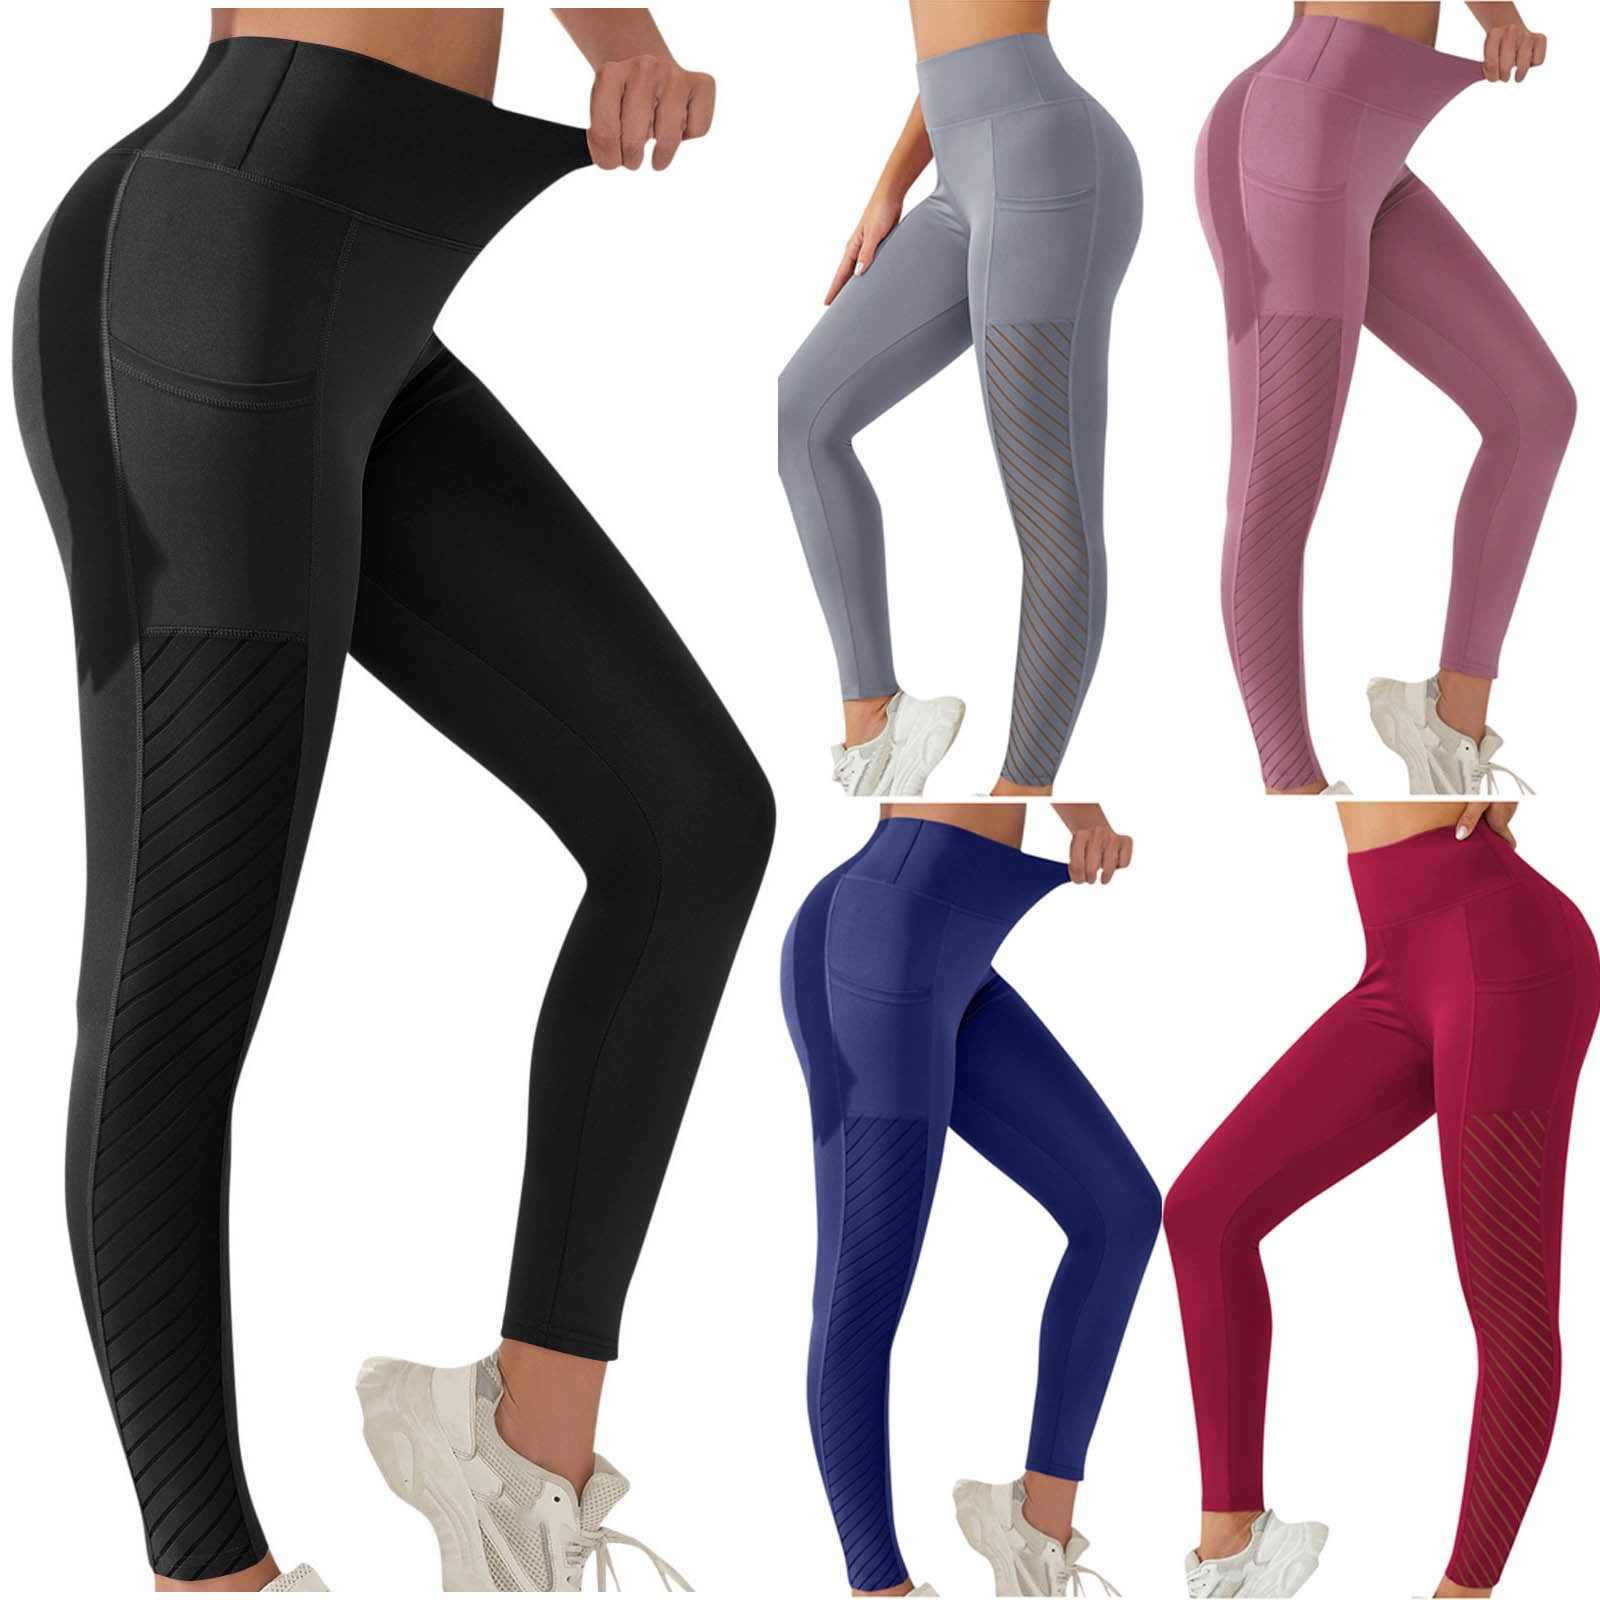 Elainilye Fashion Yoga Pants with Pockets for Women Tight Fitting High ...